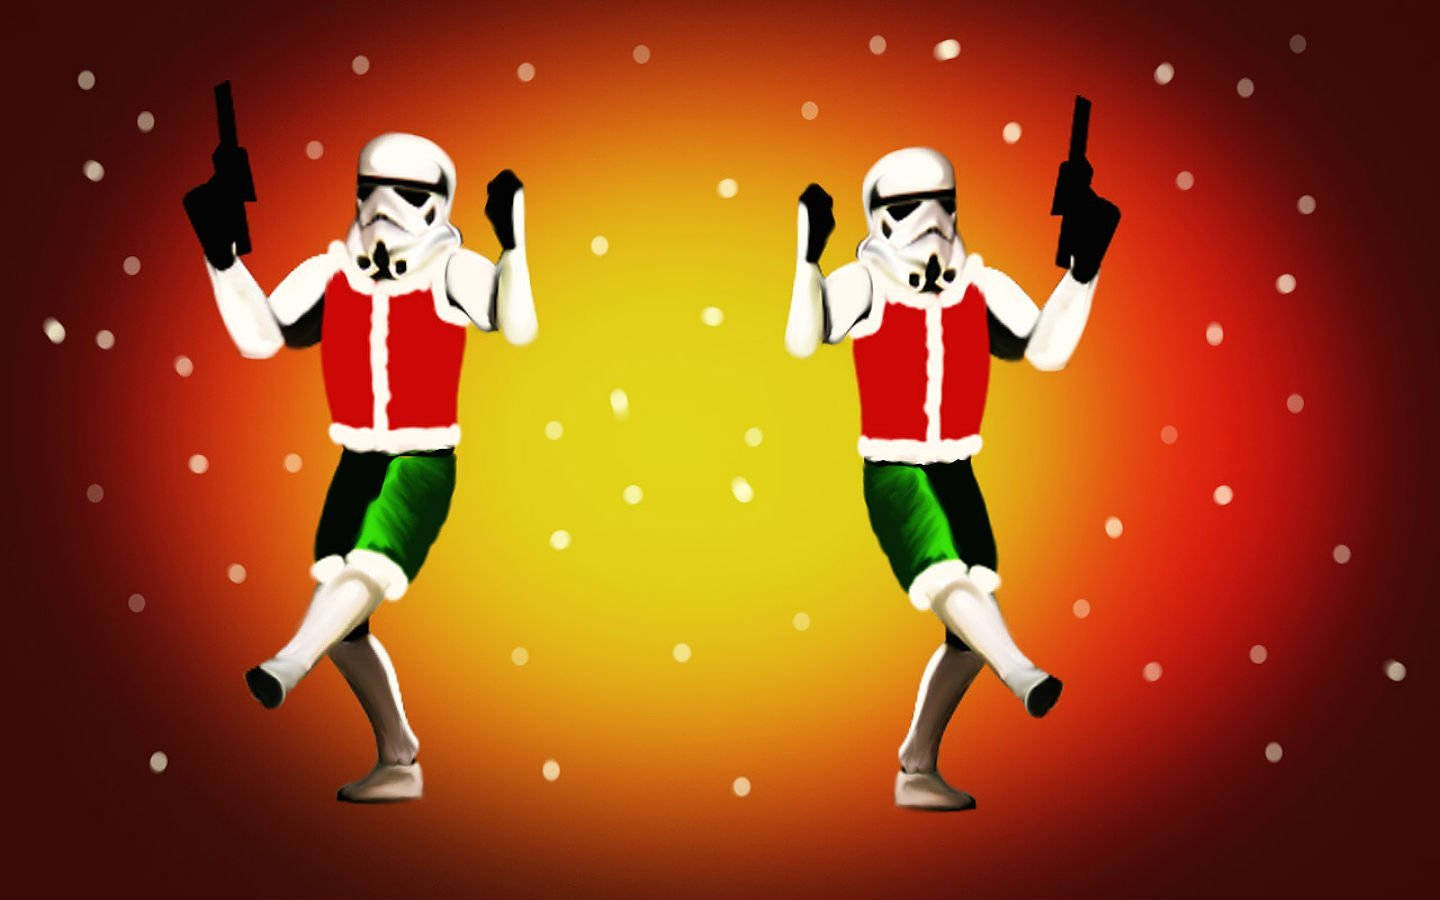 Plug In The Holiday Cheer By Celebrating Christmas With The Characters From Star Wars! Wallpaper